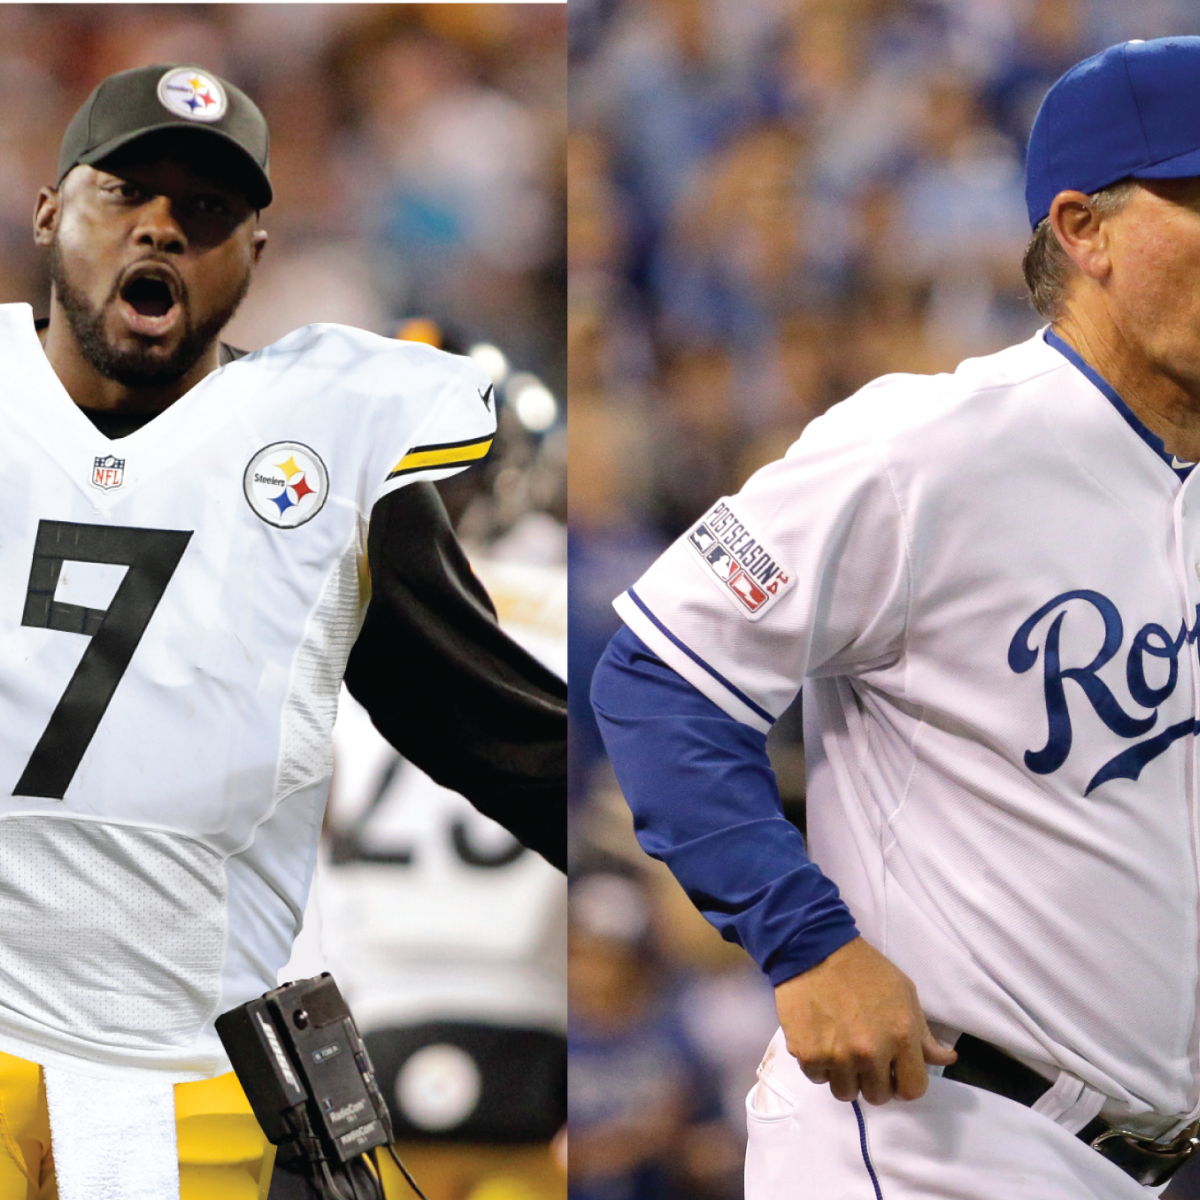 What If Other Sports Coaches Wore Uniforms Like MLB Managers